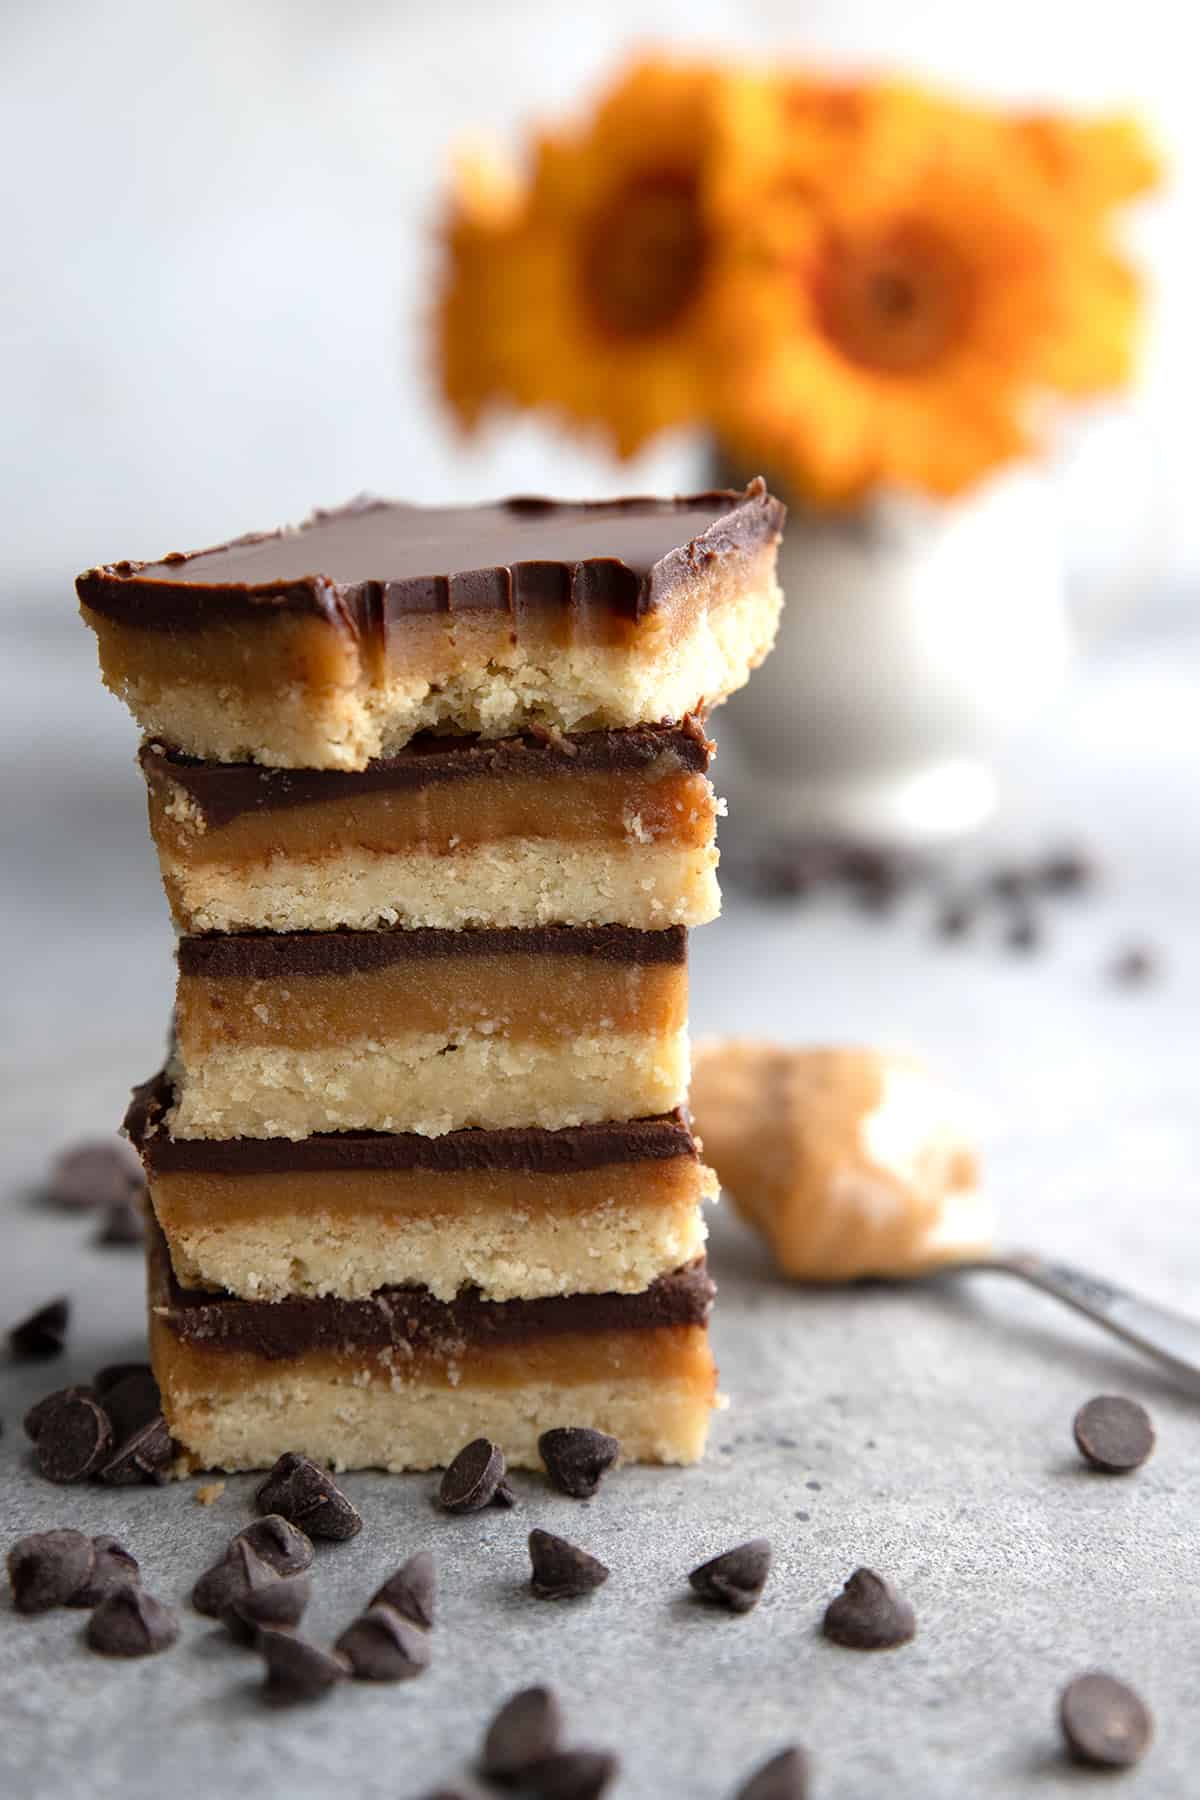 Keto Tagalong Bars in a stack on a grey table with orange flowers in the background.